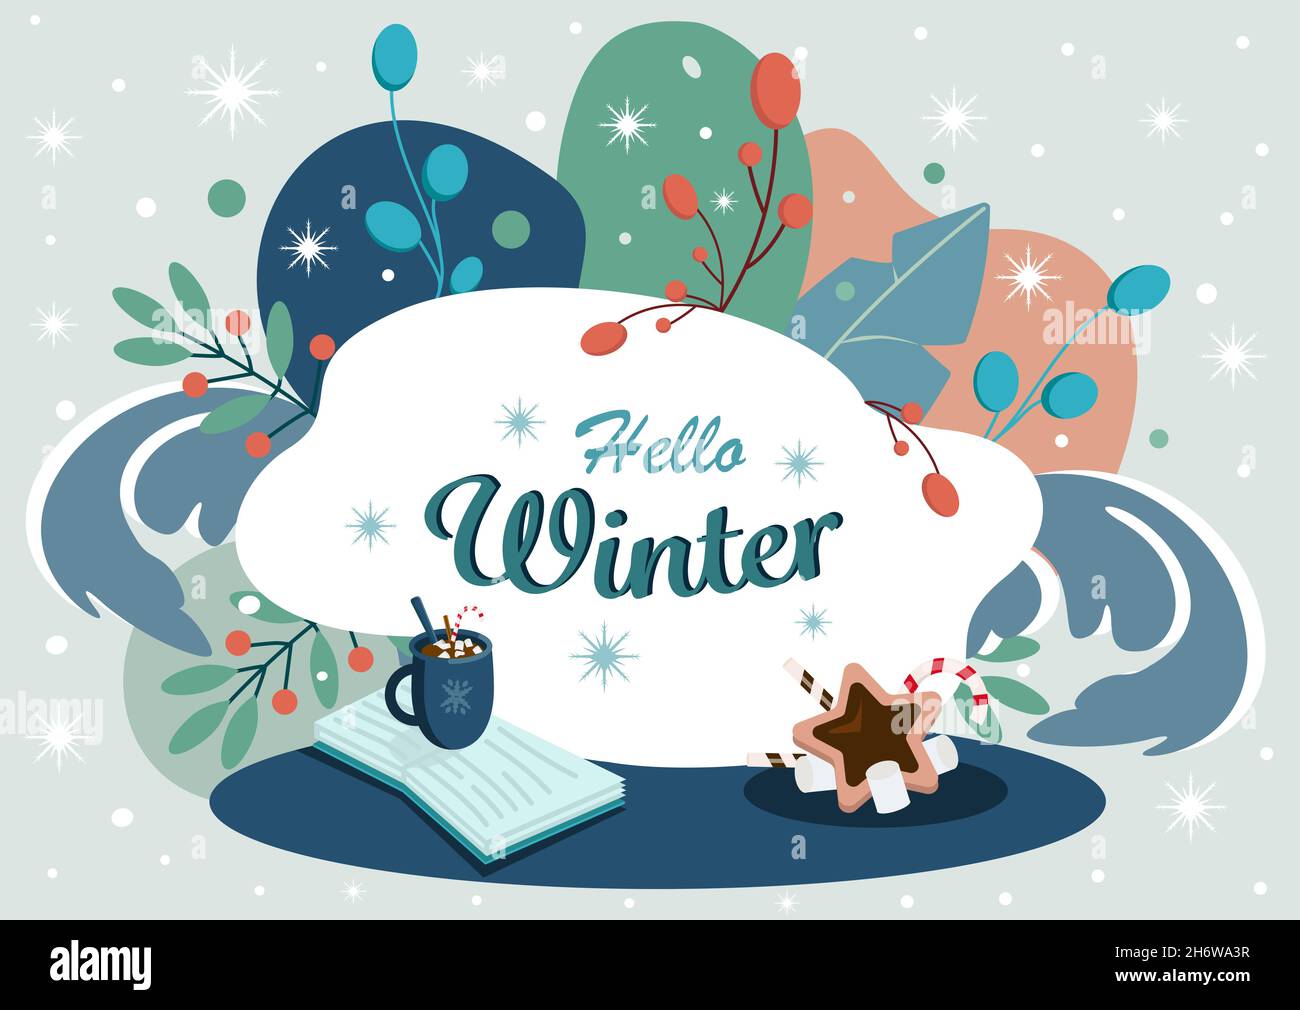 Colorful winter background with snowflakes, a cup of cocoa or coffee, sweets and a book. Hello winter concept. Vector illustration. Stock Vector